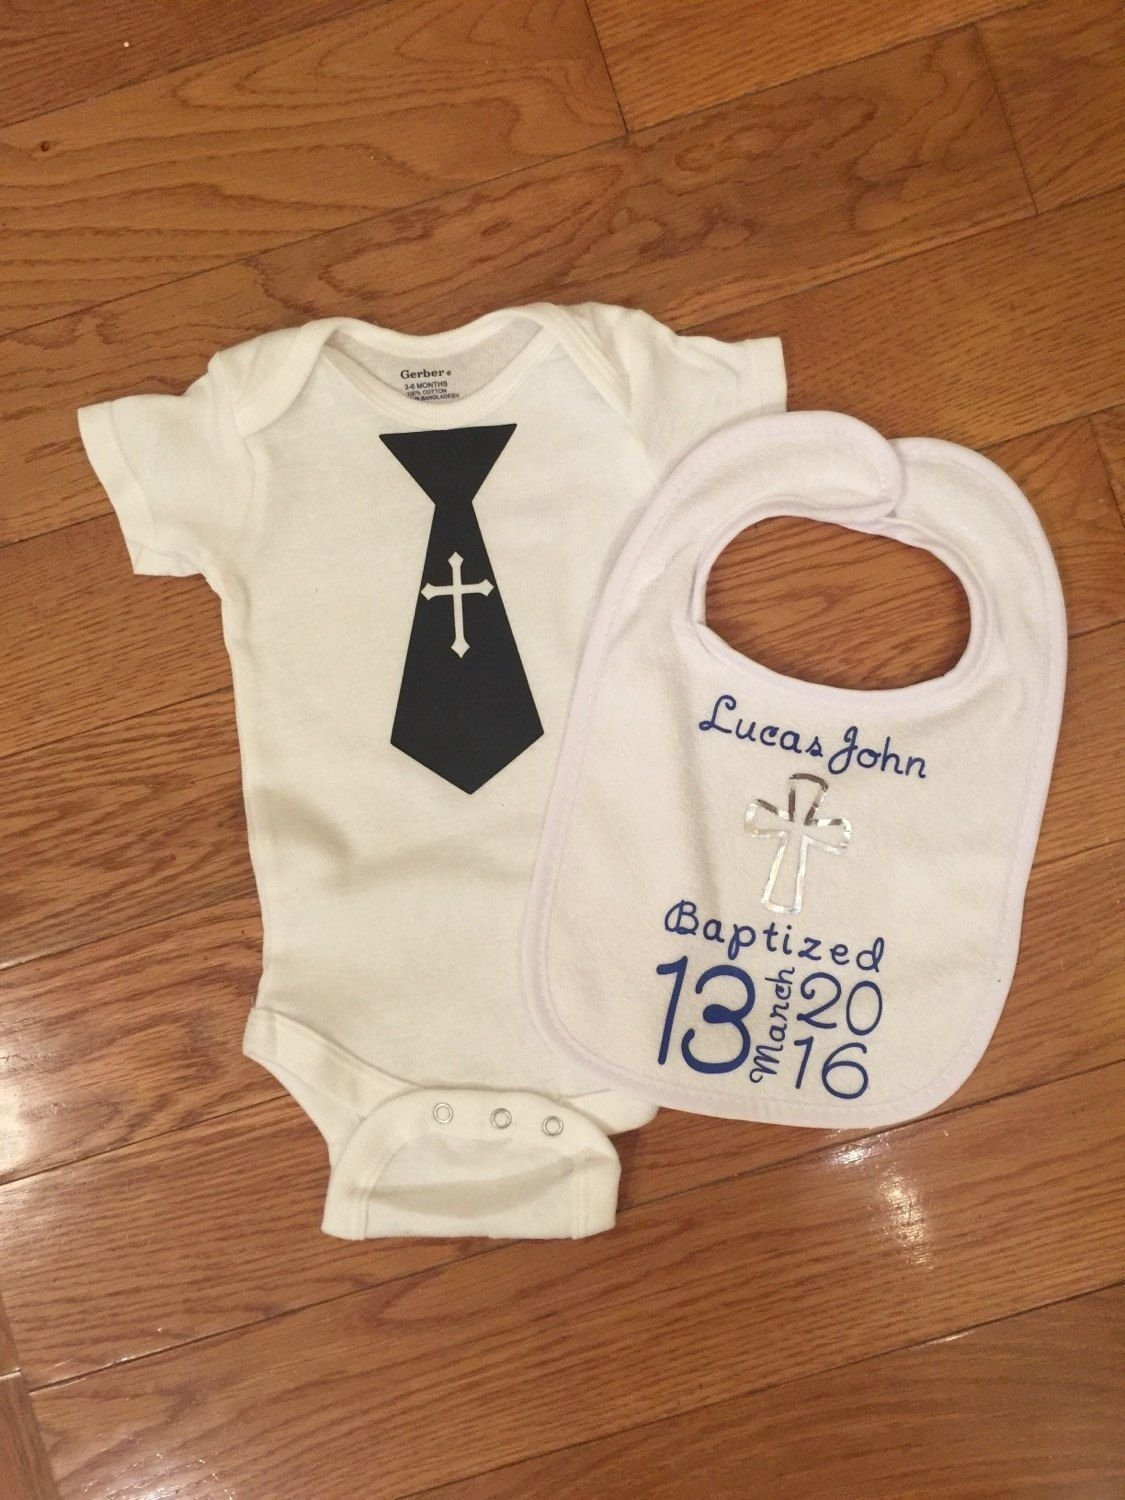 Baby Baptism Gift Ideas Boy
 10 Unique Gift Ideas For Baptism Boy 2019